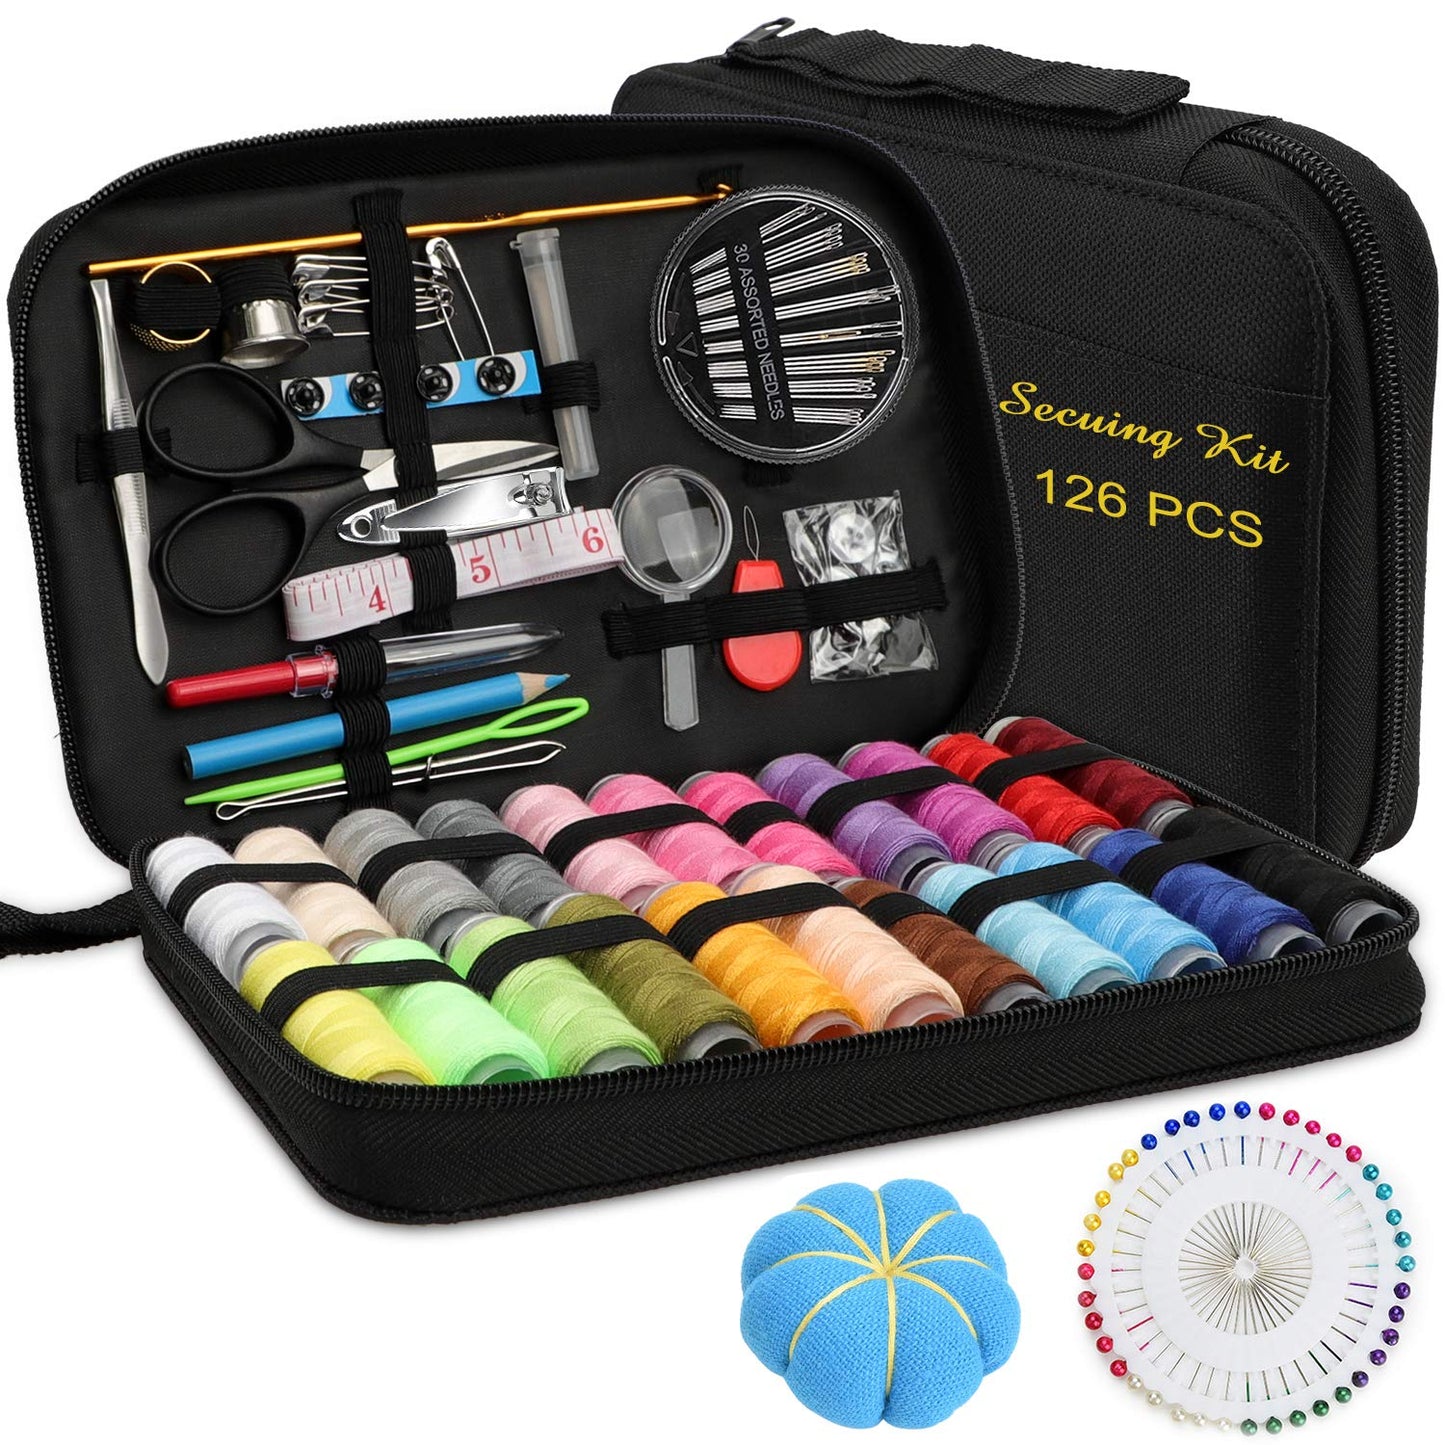 Marcoon Sewing KIT, DIY Sewing Supplies with Sewing Accessories, Portable Mini Sewing Kit for Beginner, Traveller and Emergency Clothing Fixes, with Premium Black Carrying Case (B)